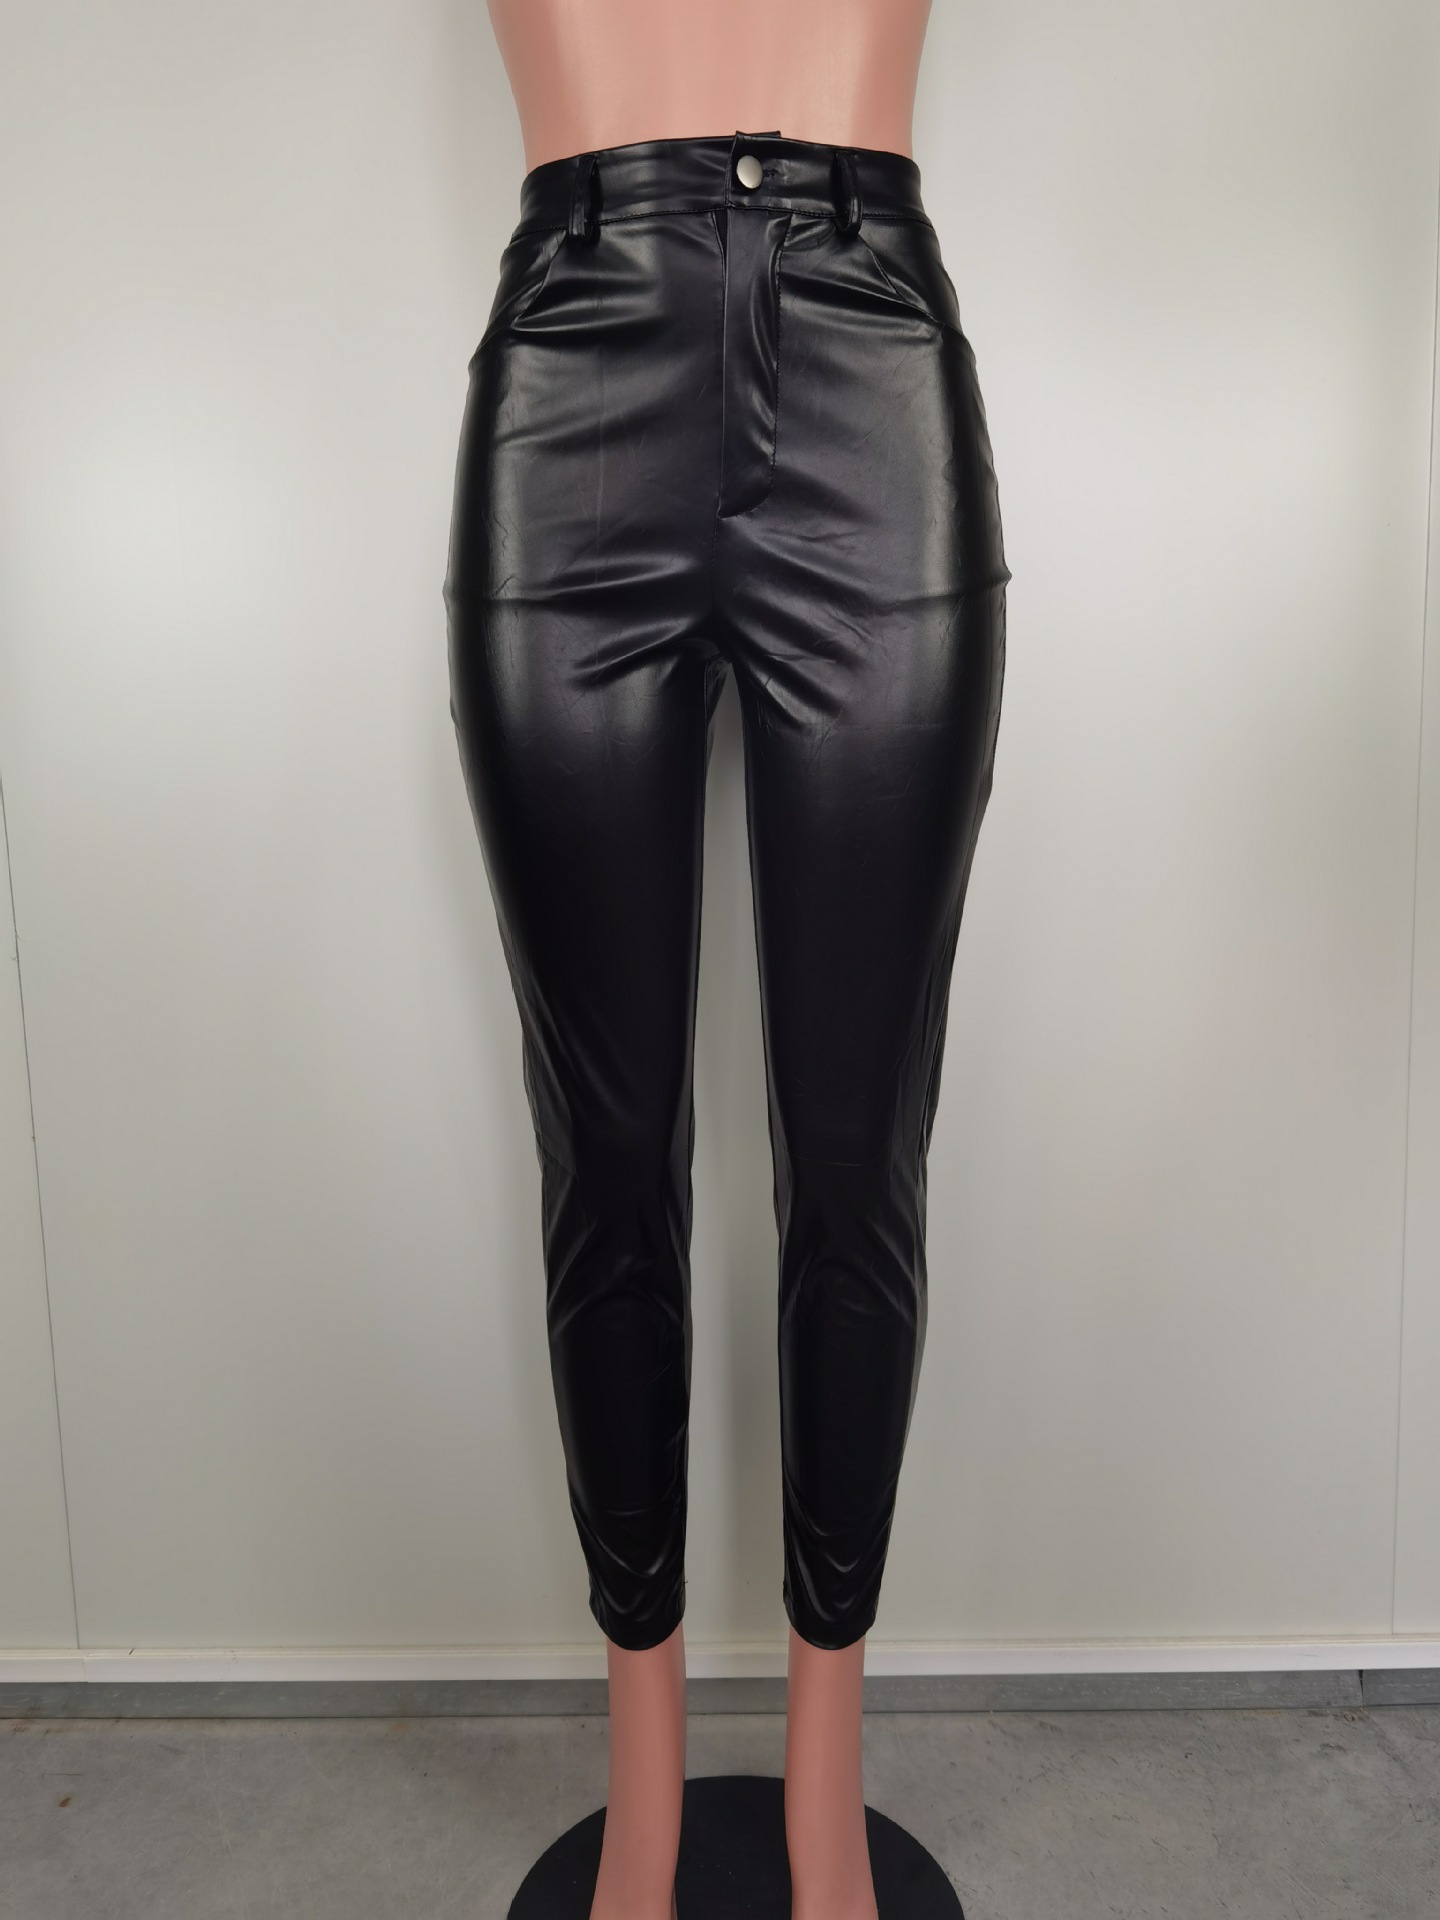 Women's Leather Pants Stylish Slim Lace-Up Leather Pants - The Little  Connection